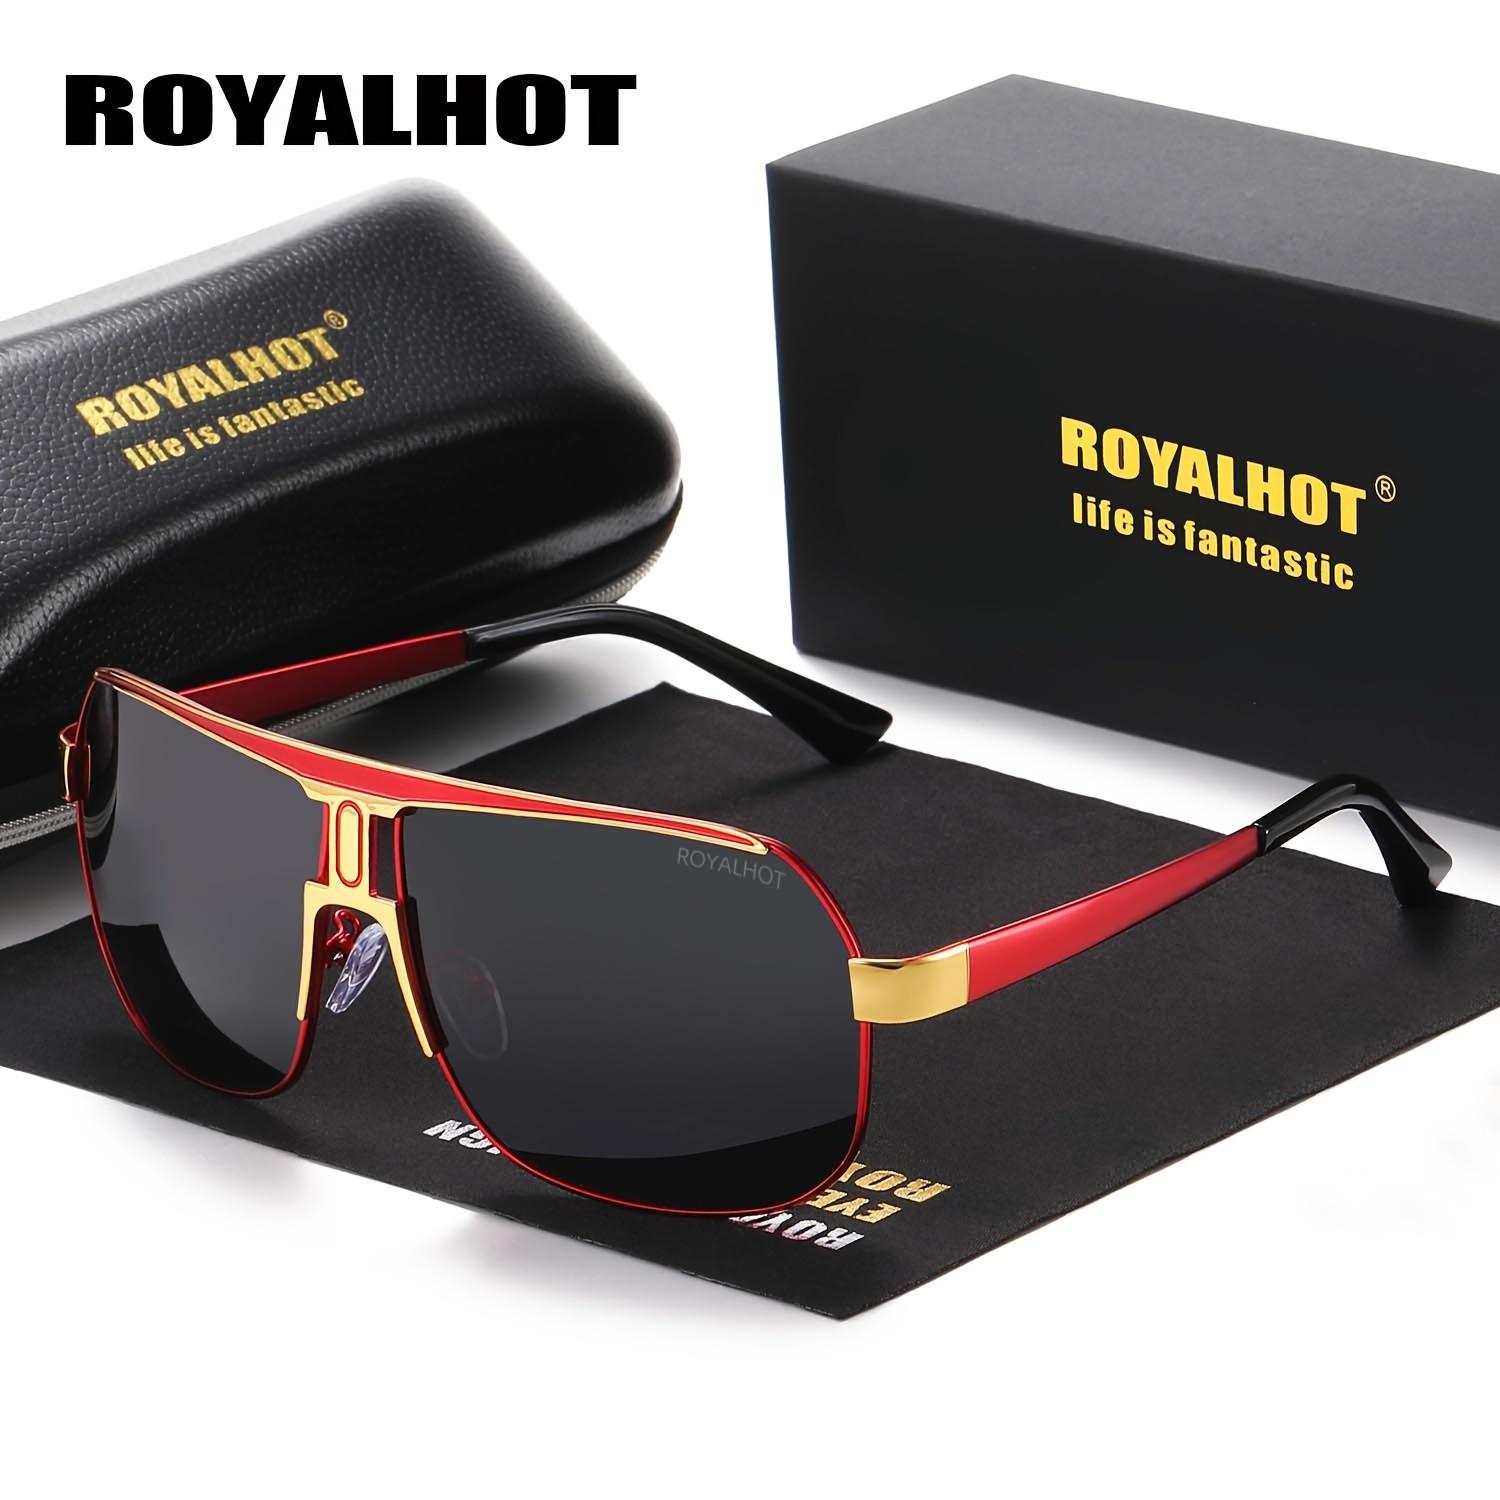 Polarized glasses for men and women Tempered glass metal